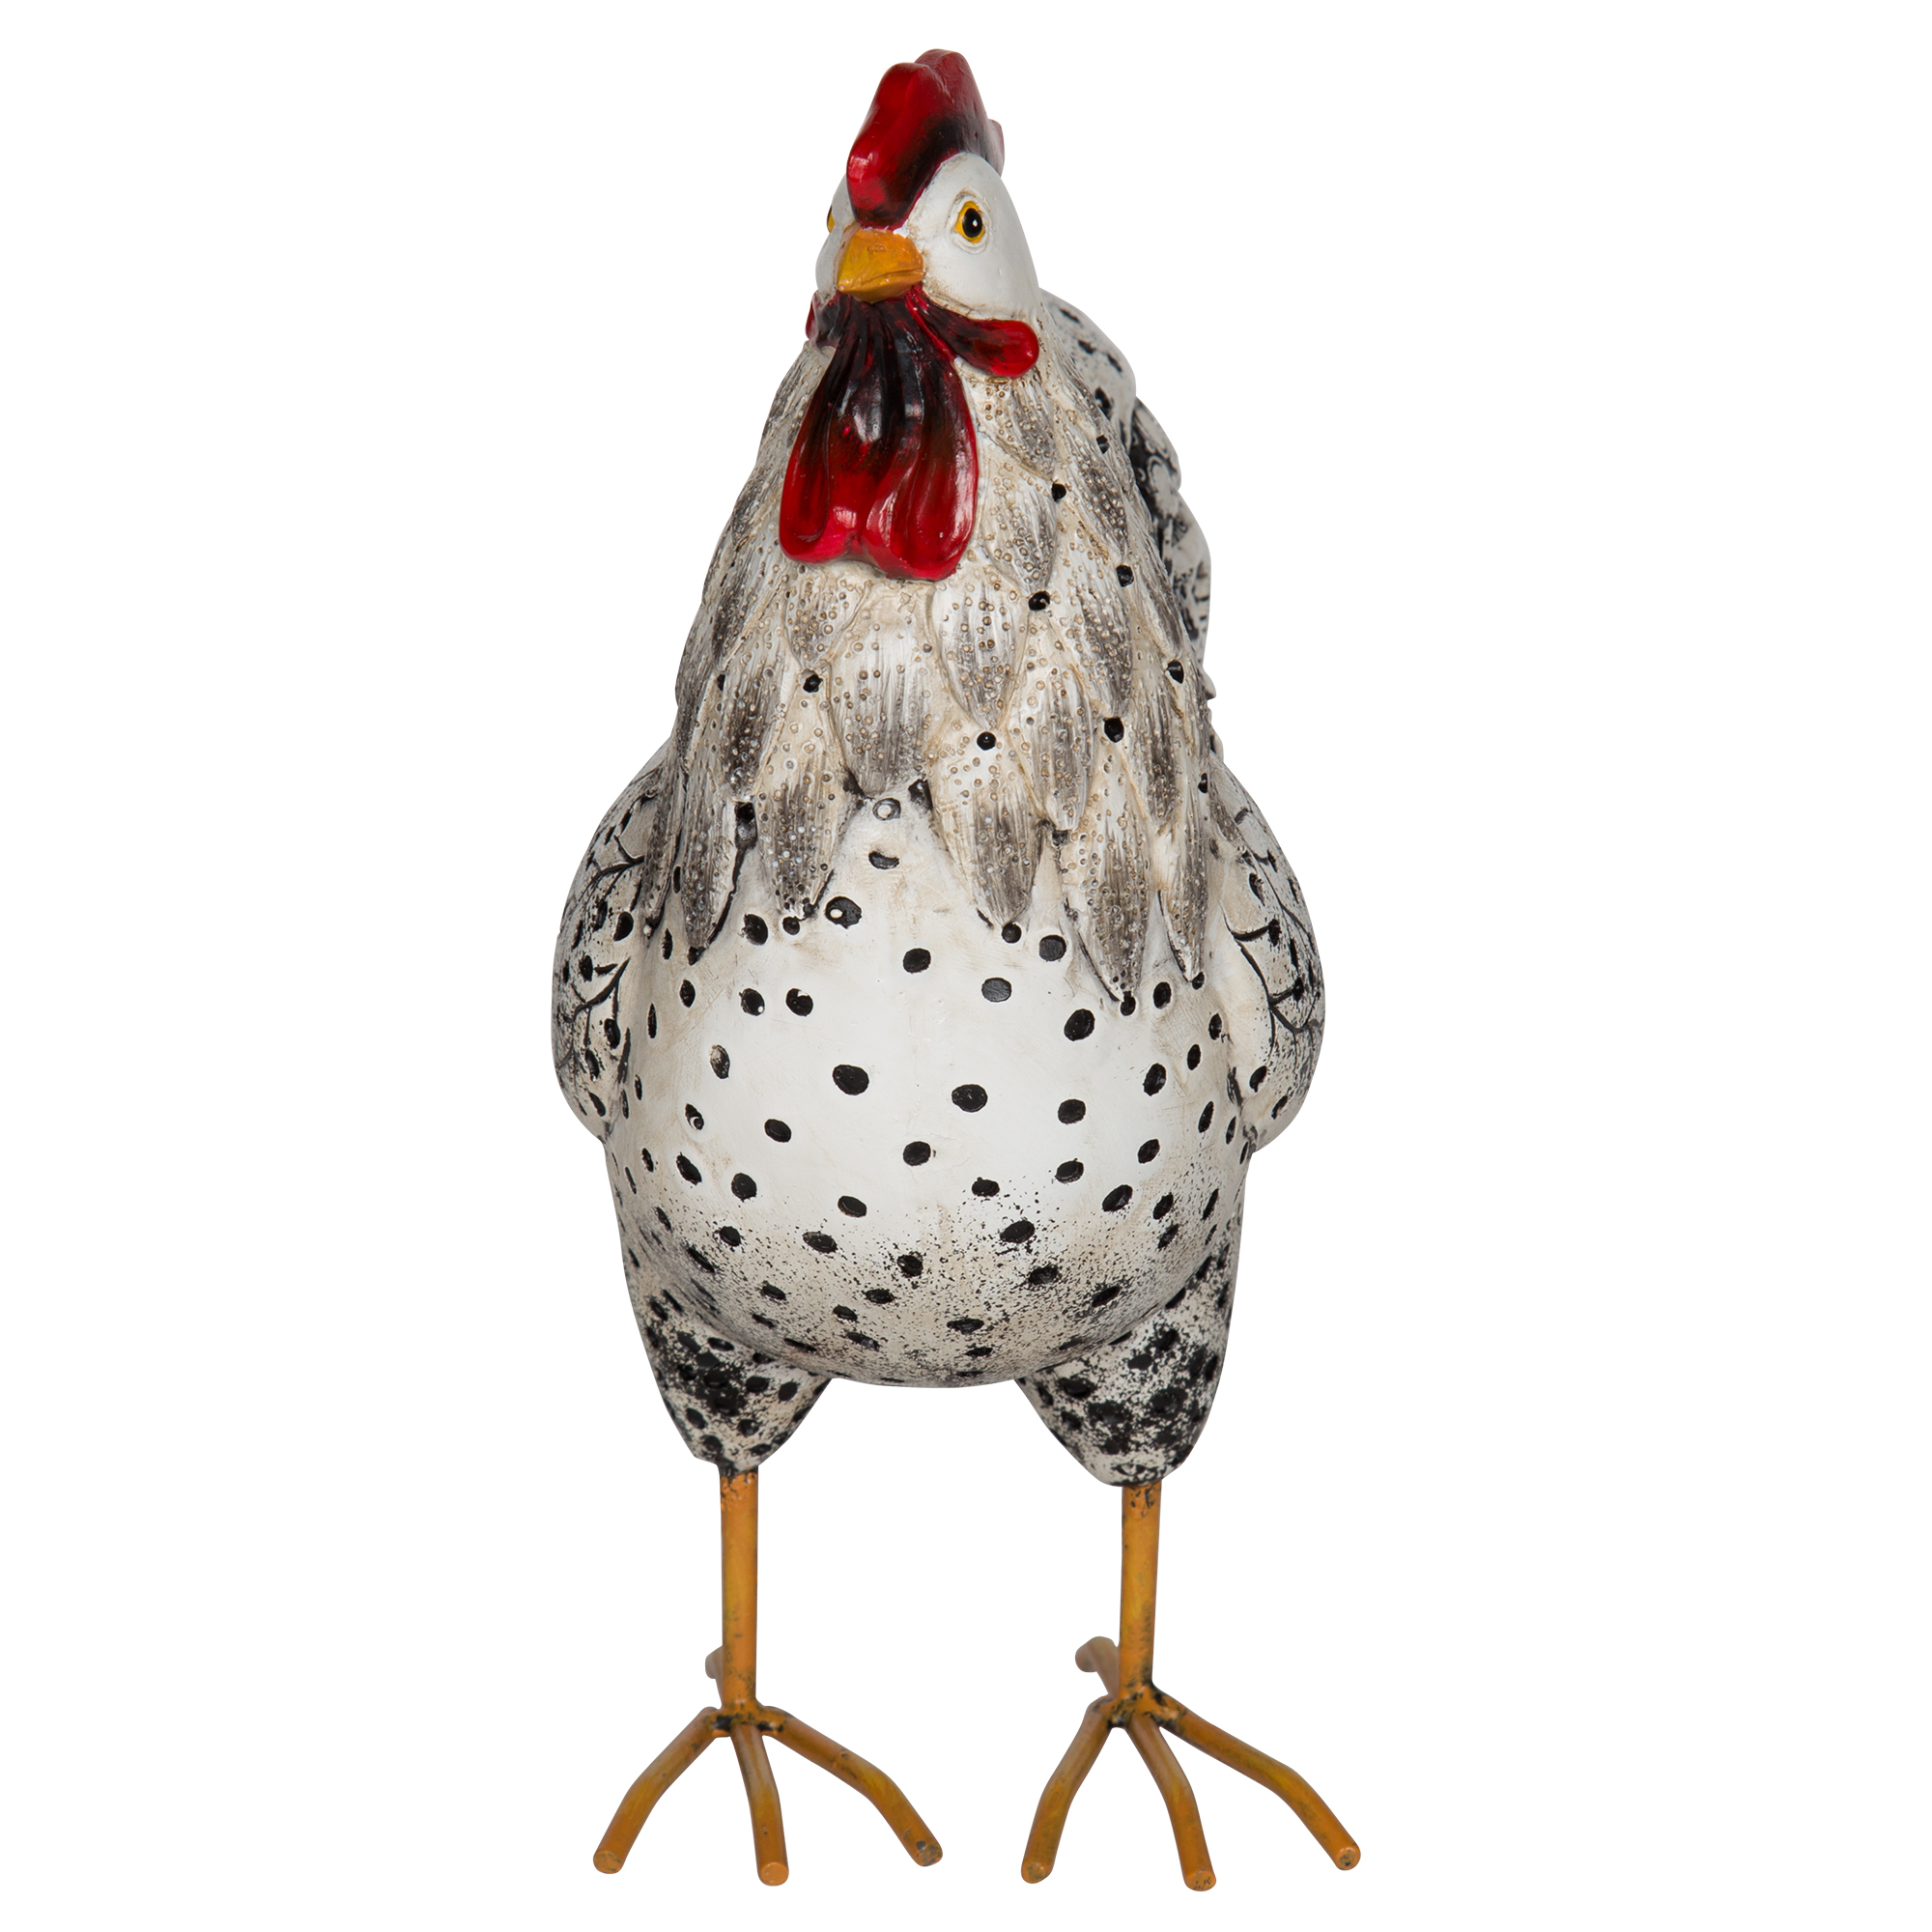 Better Homes & Gardens 9" Rustic Red & Gray Farmhouse Chicken Figurine - image 3 of 5